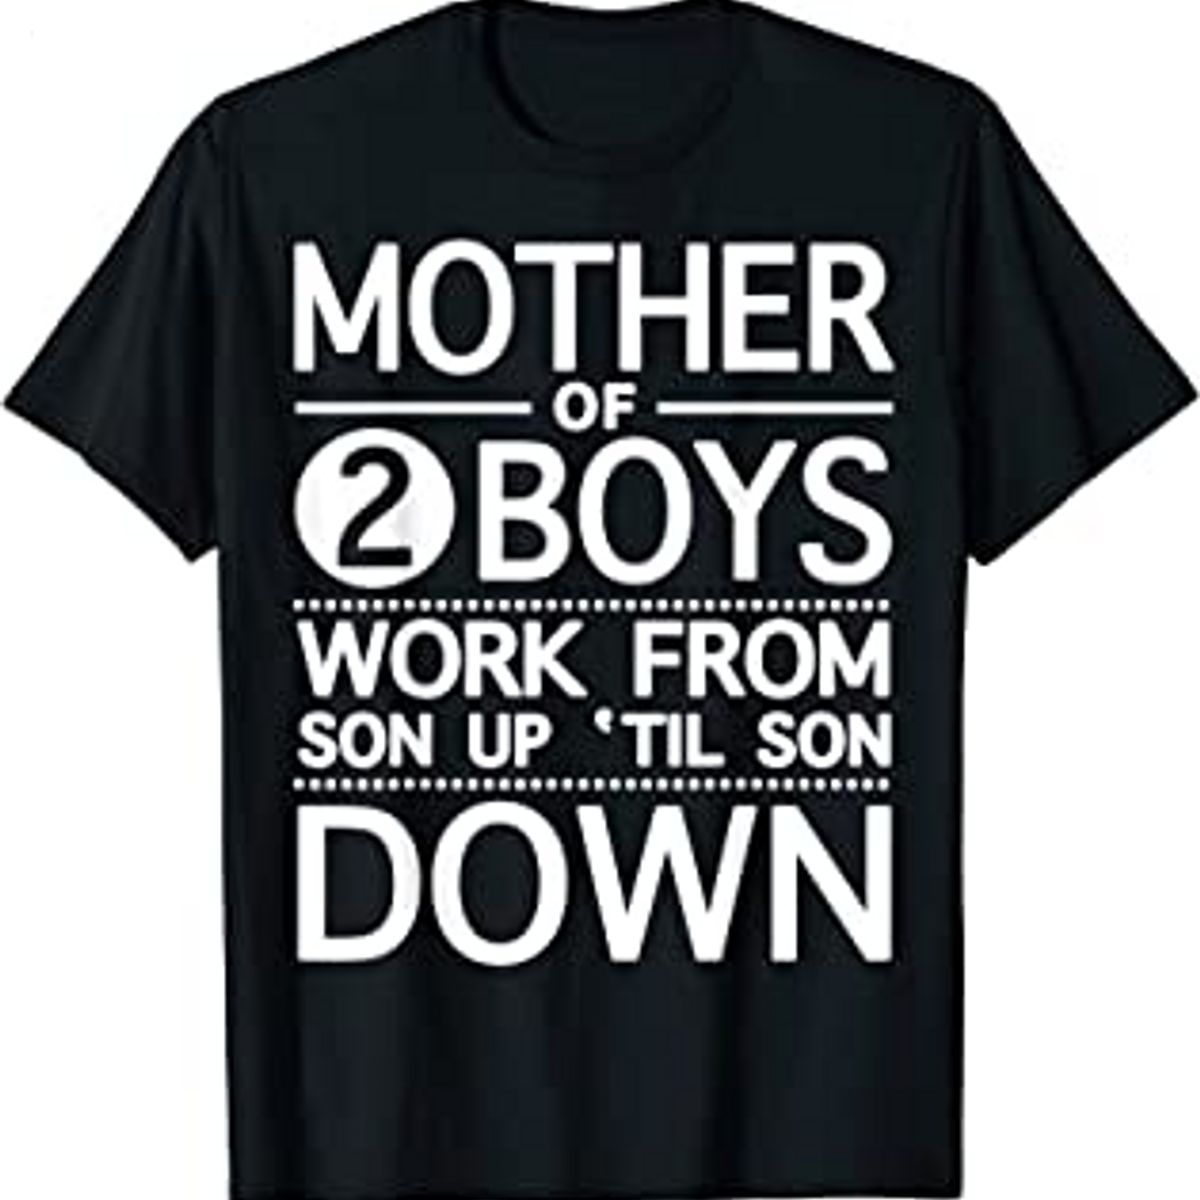 Mother Of 2 Boys Work From Son Up Until Son Down T Shirt